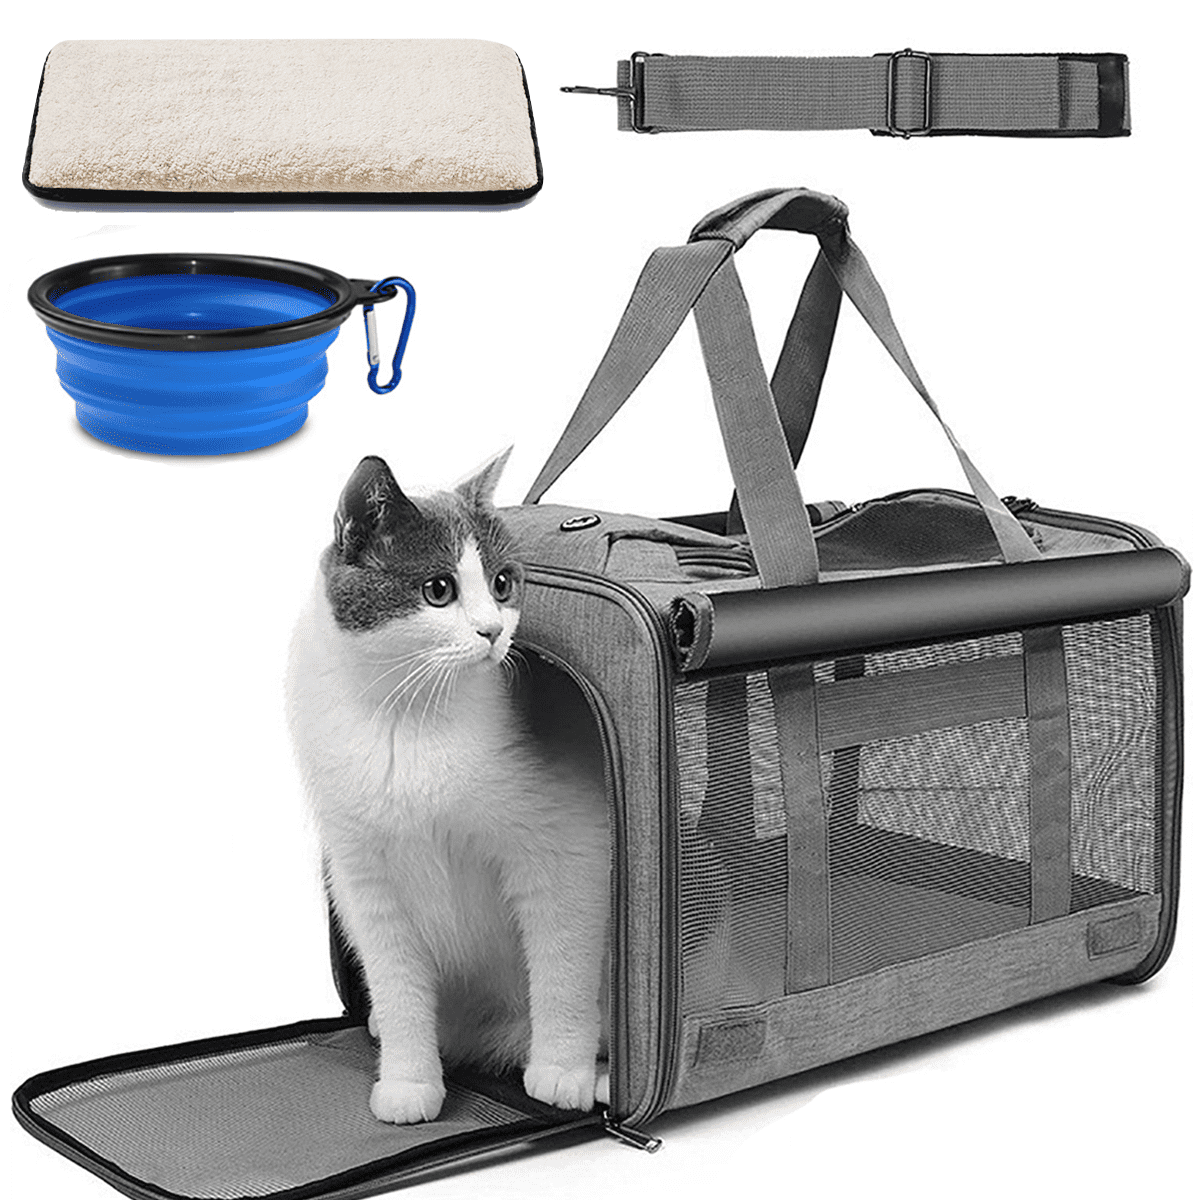 Henkelion Large cat carriers Dog carrier Pet carrier for Large cats Dogs  Puppies up to 25Lbs Big Dog carrier Soft Sided collapsi